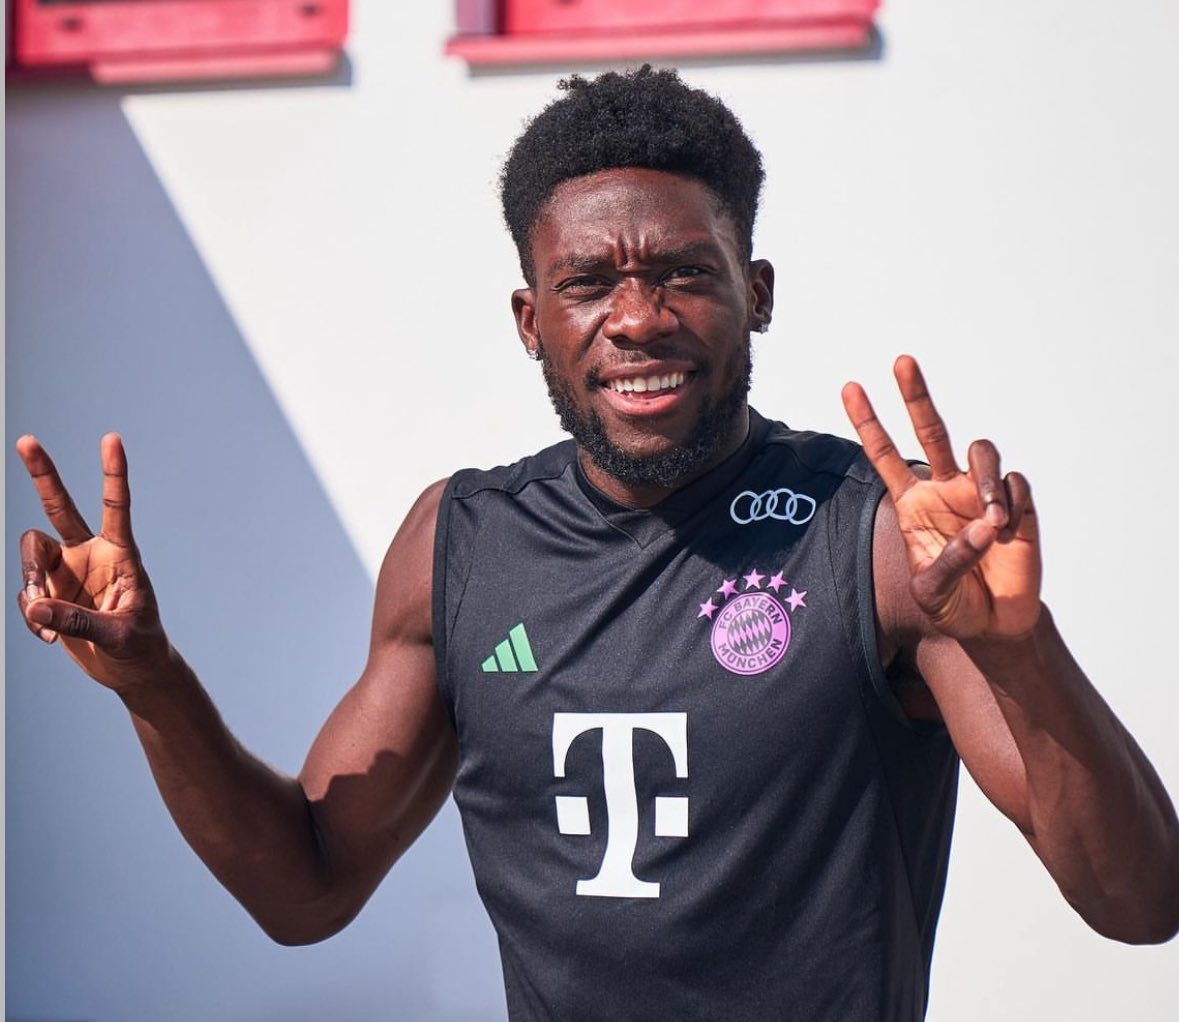 🚨🔴 Alphonso Davies’ agent Huoseh: “It’s unfair to receive an ultimatum from Bayern. We will decide how to proceed at the end of the season when there is more clarity”.

“It's unfair that Alphonso is now being attacked”, told BILD.

“We were close to an agreement a year ago.